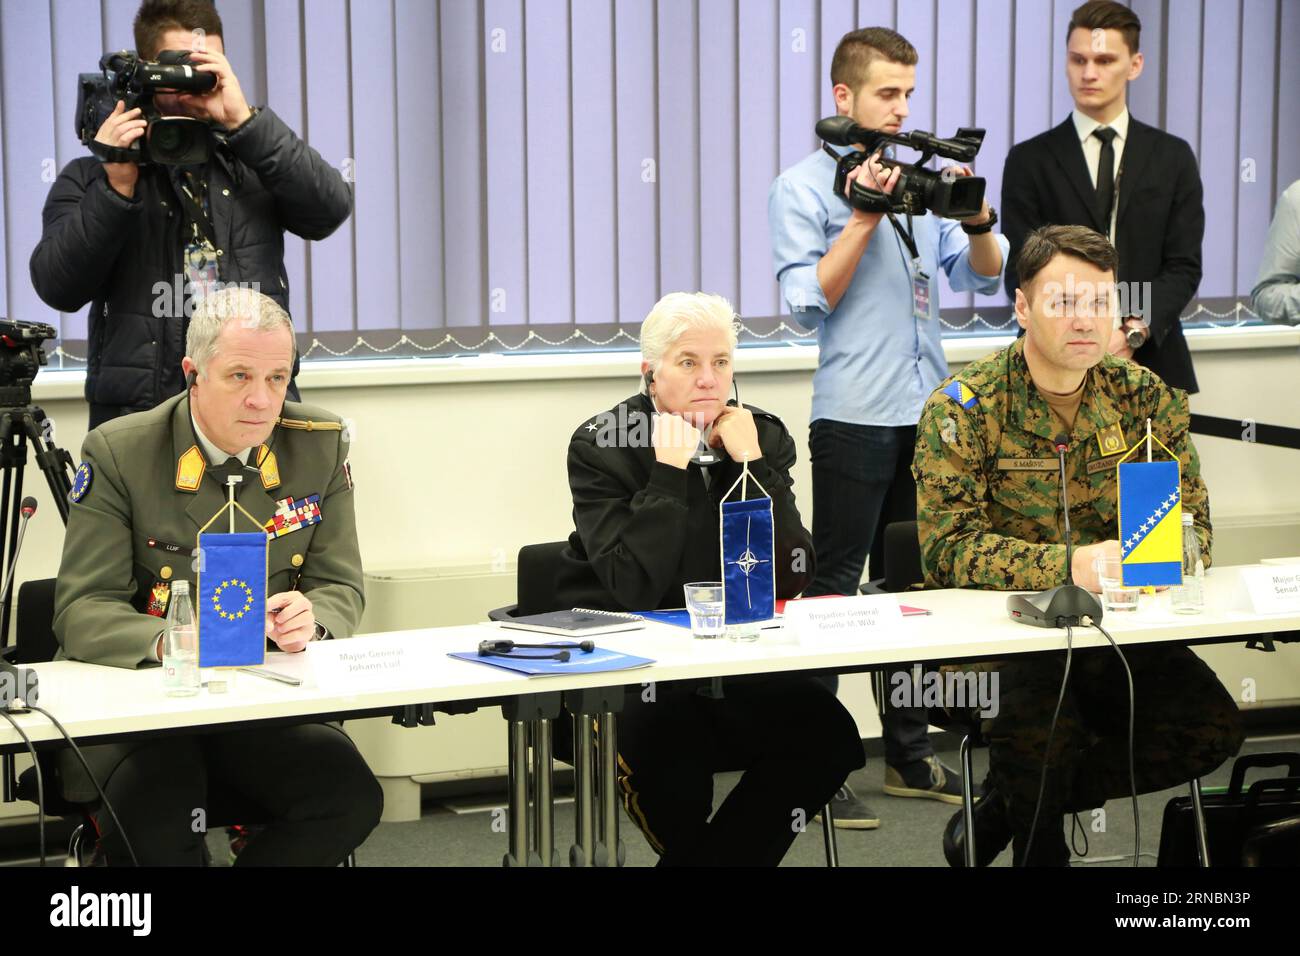 (160309) -- SARAJEVO, March 9, 2016 -- Commander of European Union Force (EUFOR) in Bosnia and Herzegovina (BiH) Major General Johann Luif (1st L, front), Commander of the North Atlantic Treaty Organization (NATO) Headquarters in Sarajevo Brigadier General Giselle M. Wilz (2nd L, front) attend a session of the Strategic Committee for Weapons, Ammunition and Explosive Ordnance in Sarajevo, BiH, on March 9, 2016. ) BOSNIA AND HERZEGOVINA-SARAJEVO-DESTRUCTION OF WEAPONS HarisxMemija PUBLICATIONxNOTxINxCHN   Sarajevo March 9 2016 Commander of European Union Force EUFOR in Bosnia and Herzegovina BI Stock Photo